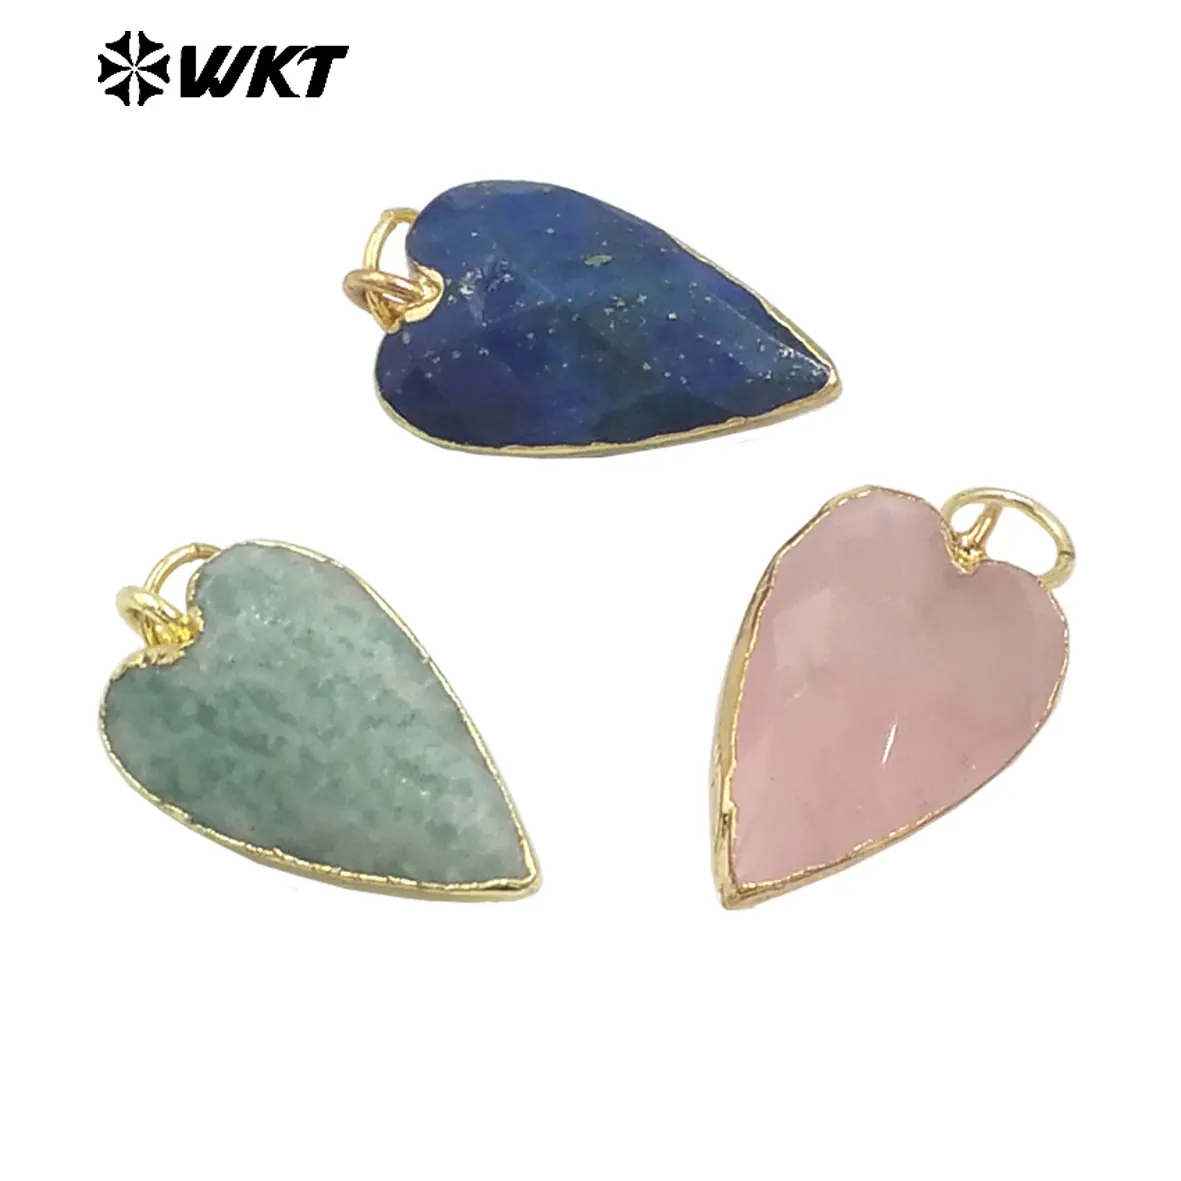 WT-P1965 Wholesale Fashion Gold Plated Long Drop Hand Carved Double Facted Heart Stone Jewelry Pendants